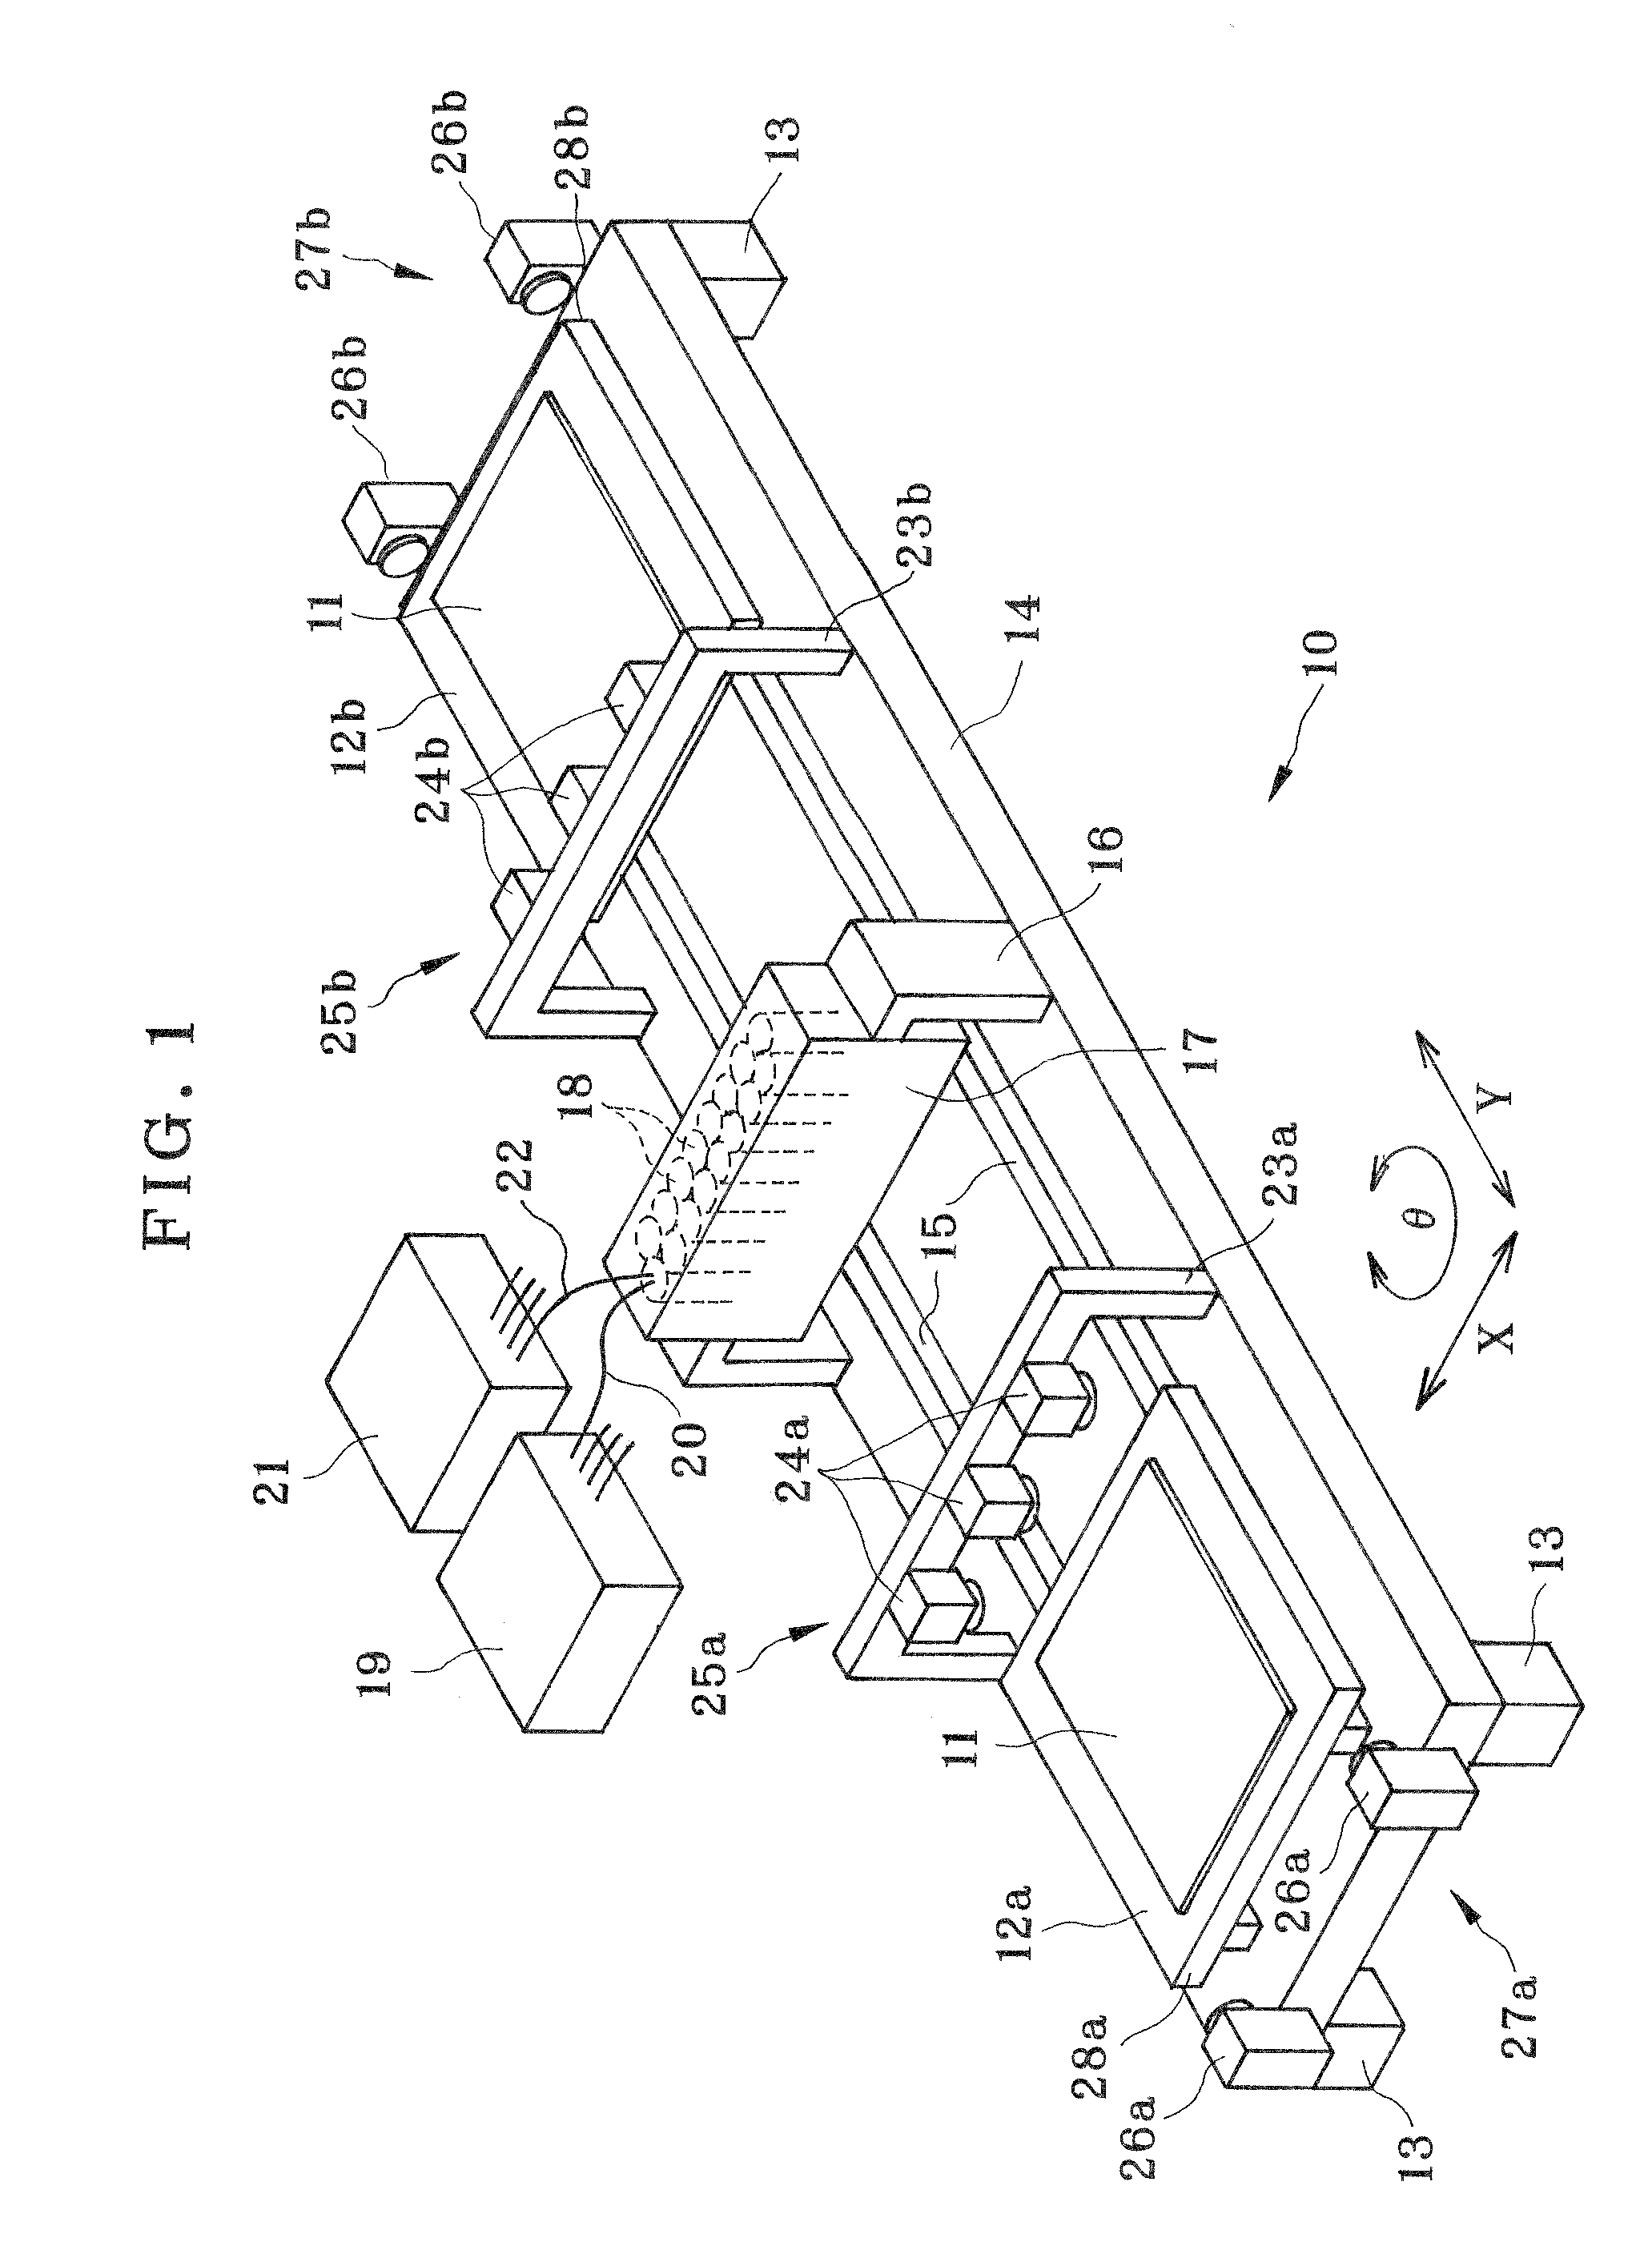 Pattern forming apparatus and method